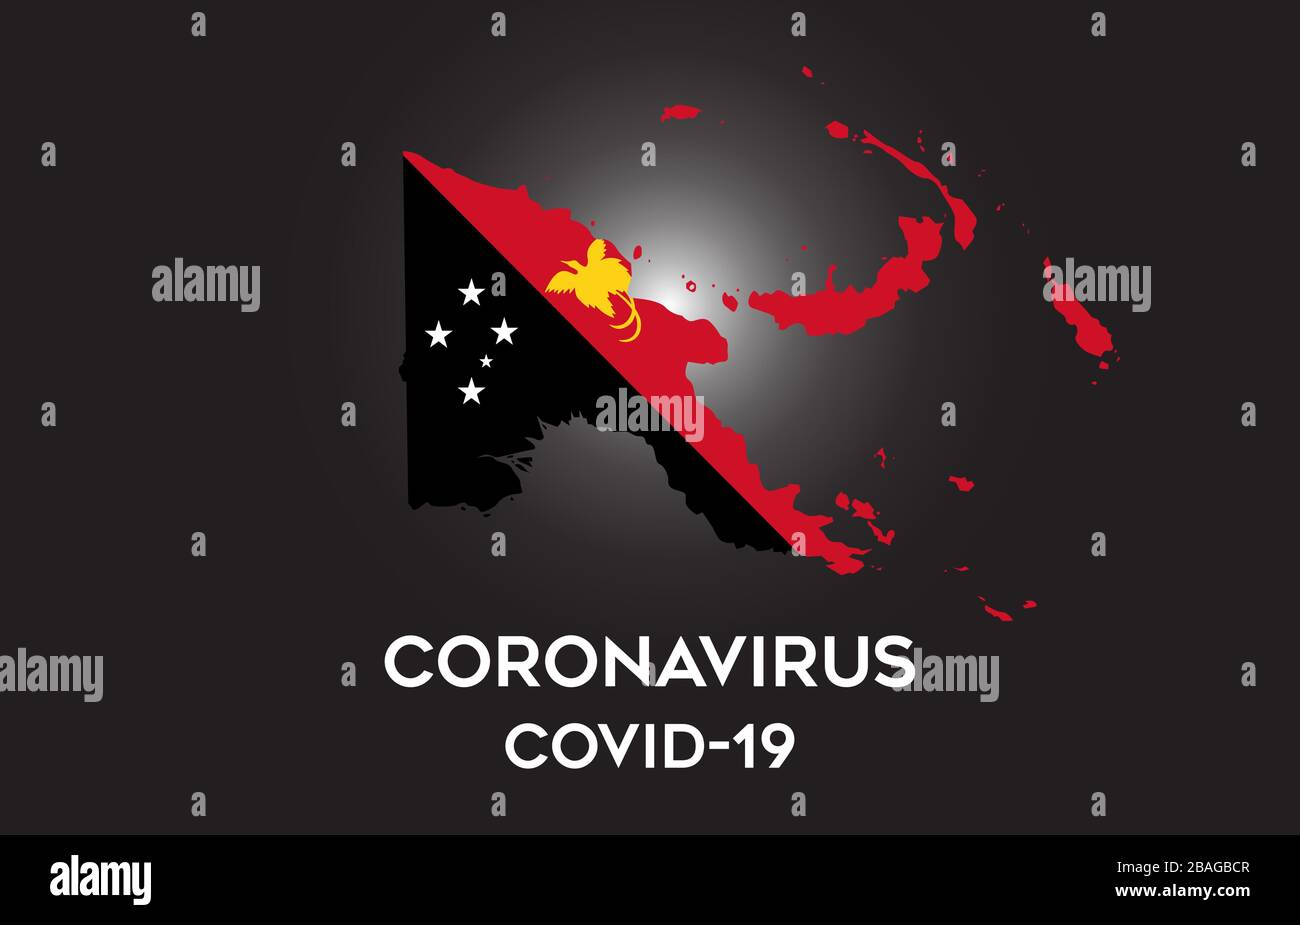 CoronaVirus in Papua New Guinea and Country flag inside Country border Map Vector Design. Covid-19 with Papua New Guinea map with national flag Vector Stock Vector